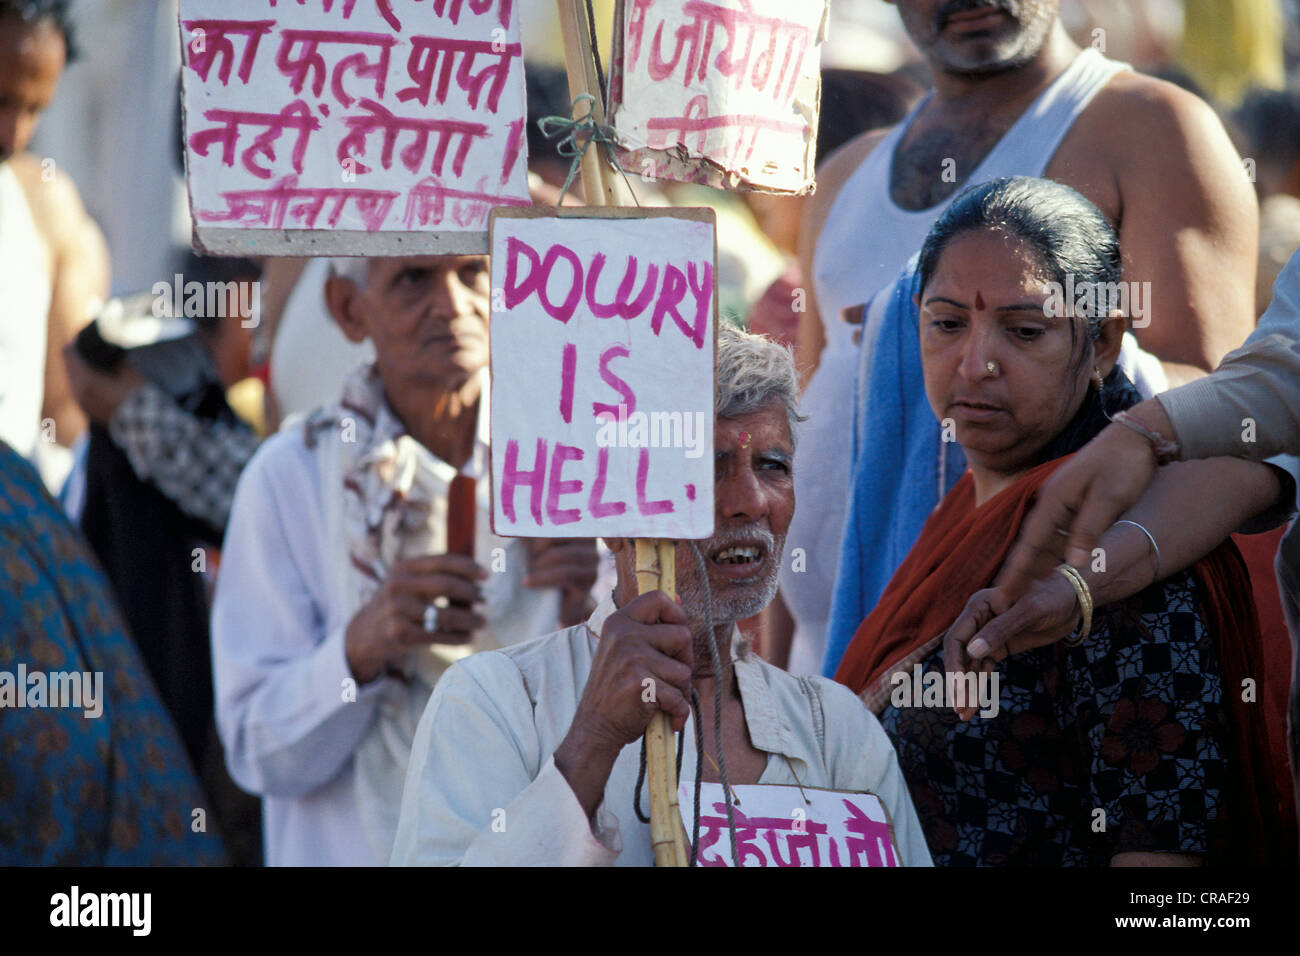 Demonstration and protest against dowry, New Delhi, India, Asia Stock Photo